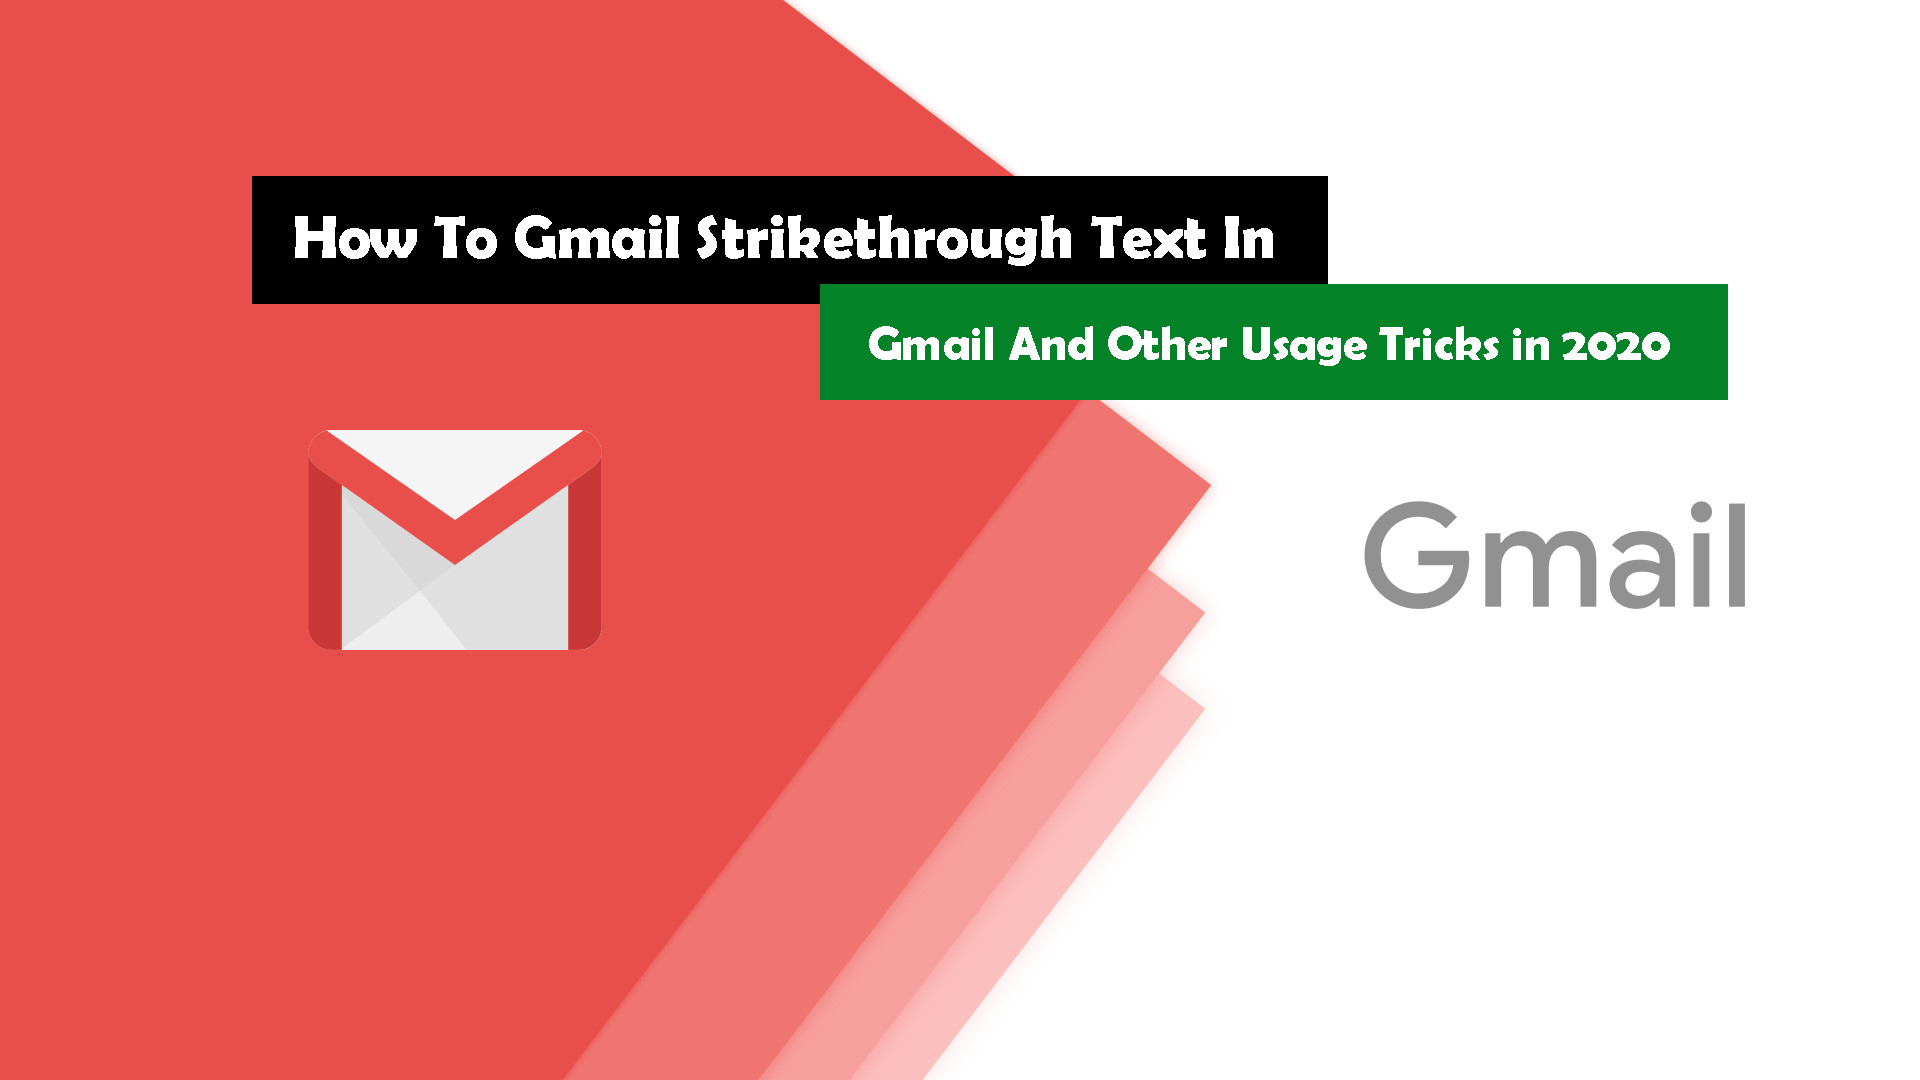 How To Gmail Strikethrough Text In Gmail And Other Usage Tricks in 2020